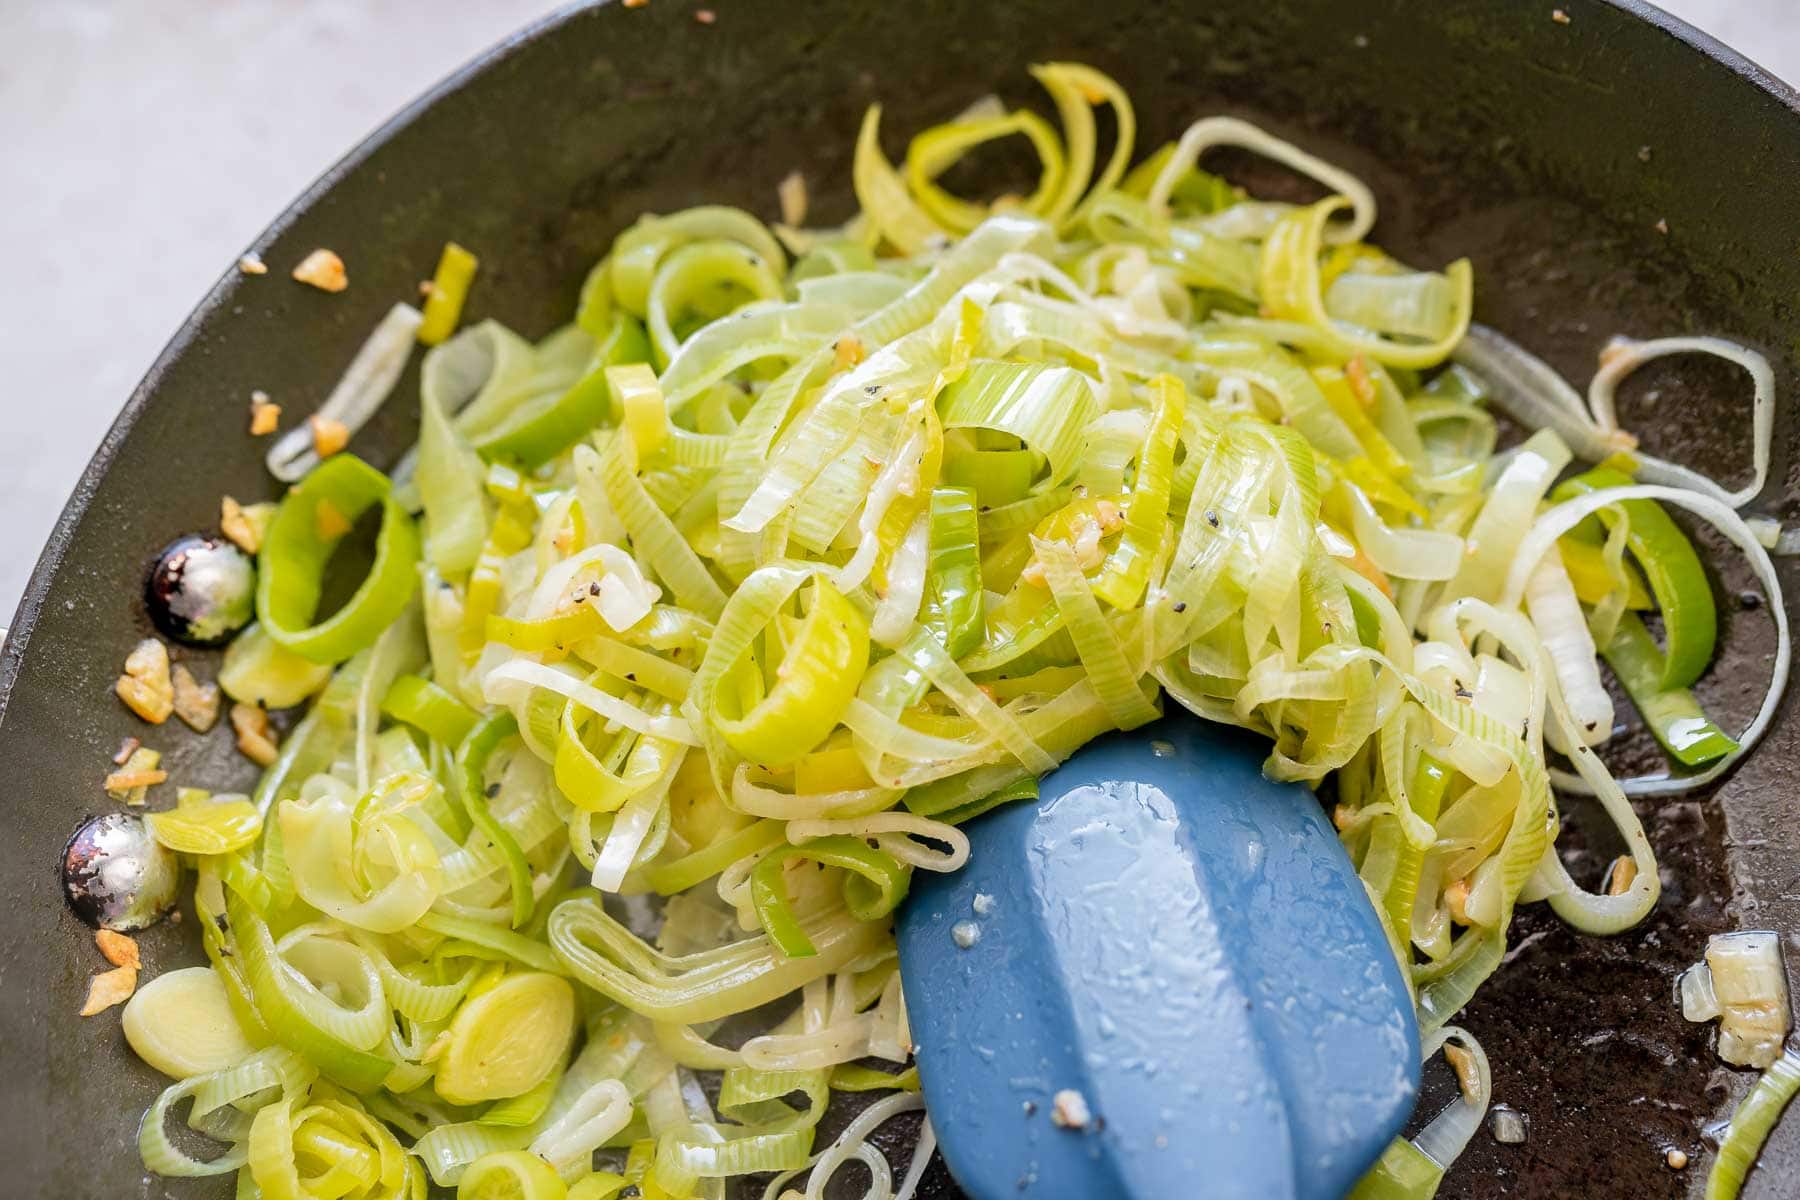 Freshly sauteed leeks rest in a dark black skillet with a blue spatula.